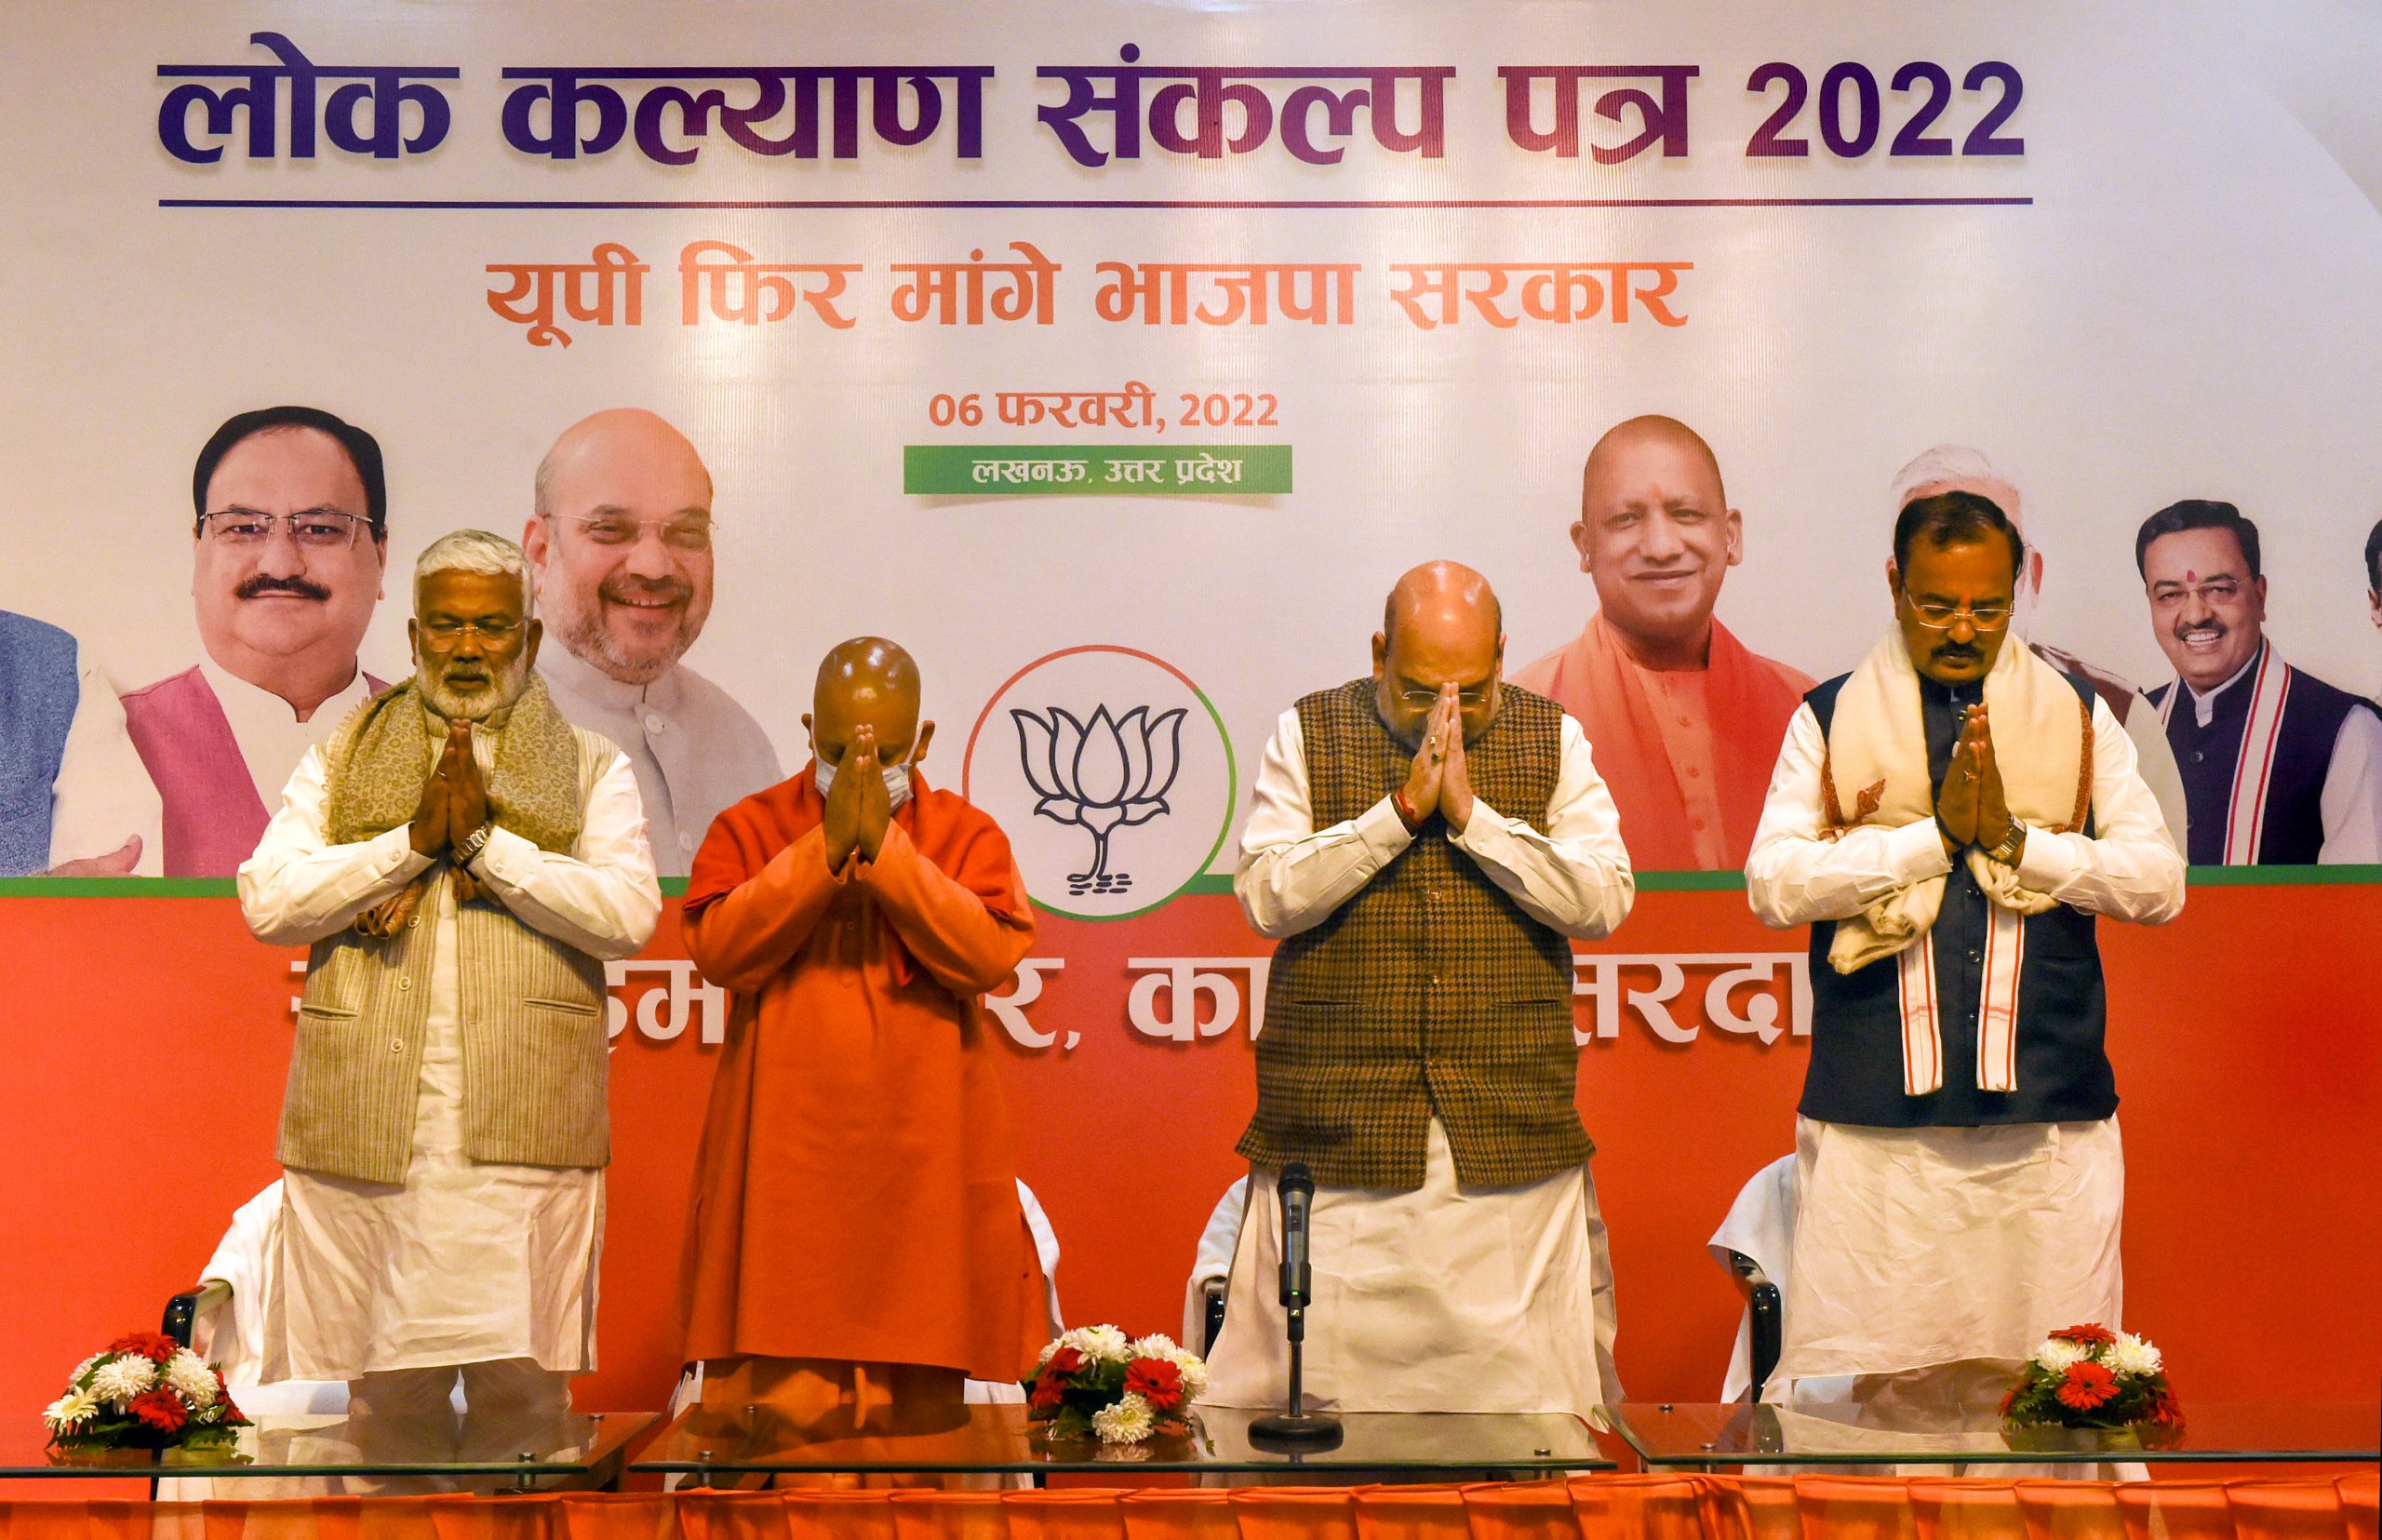 Union Home Minister Amit Shah releases BJP’s manifesto in Lucknow, makes four major promises